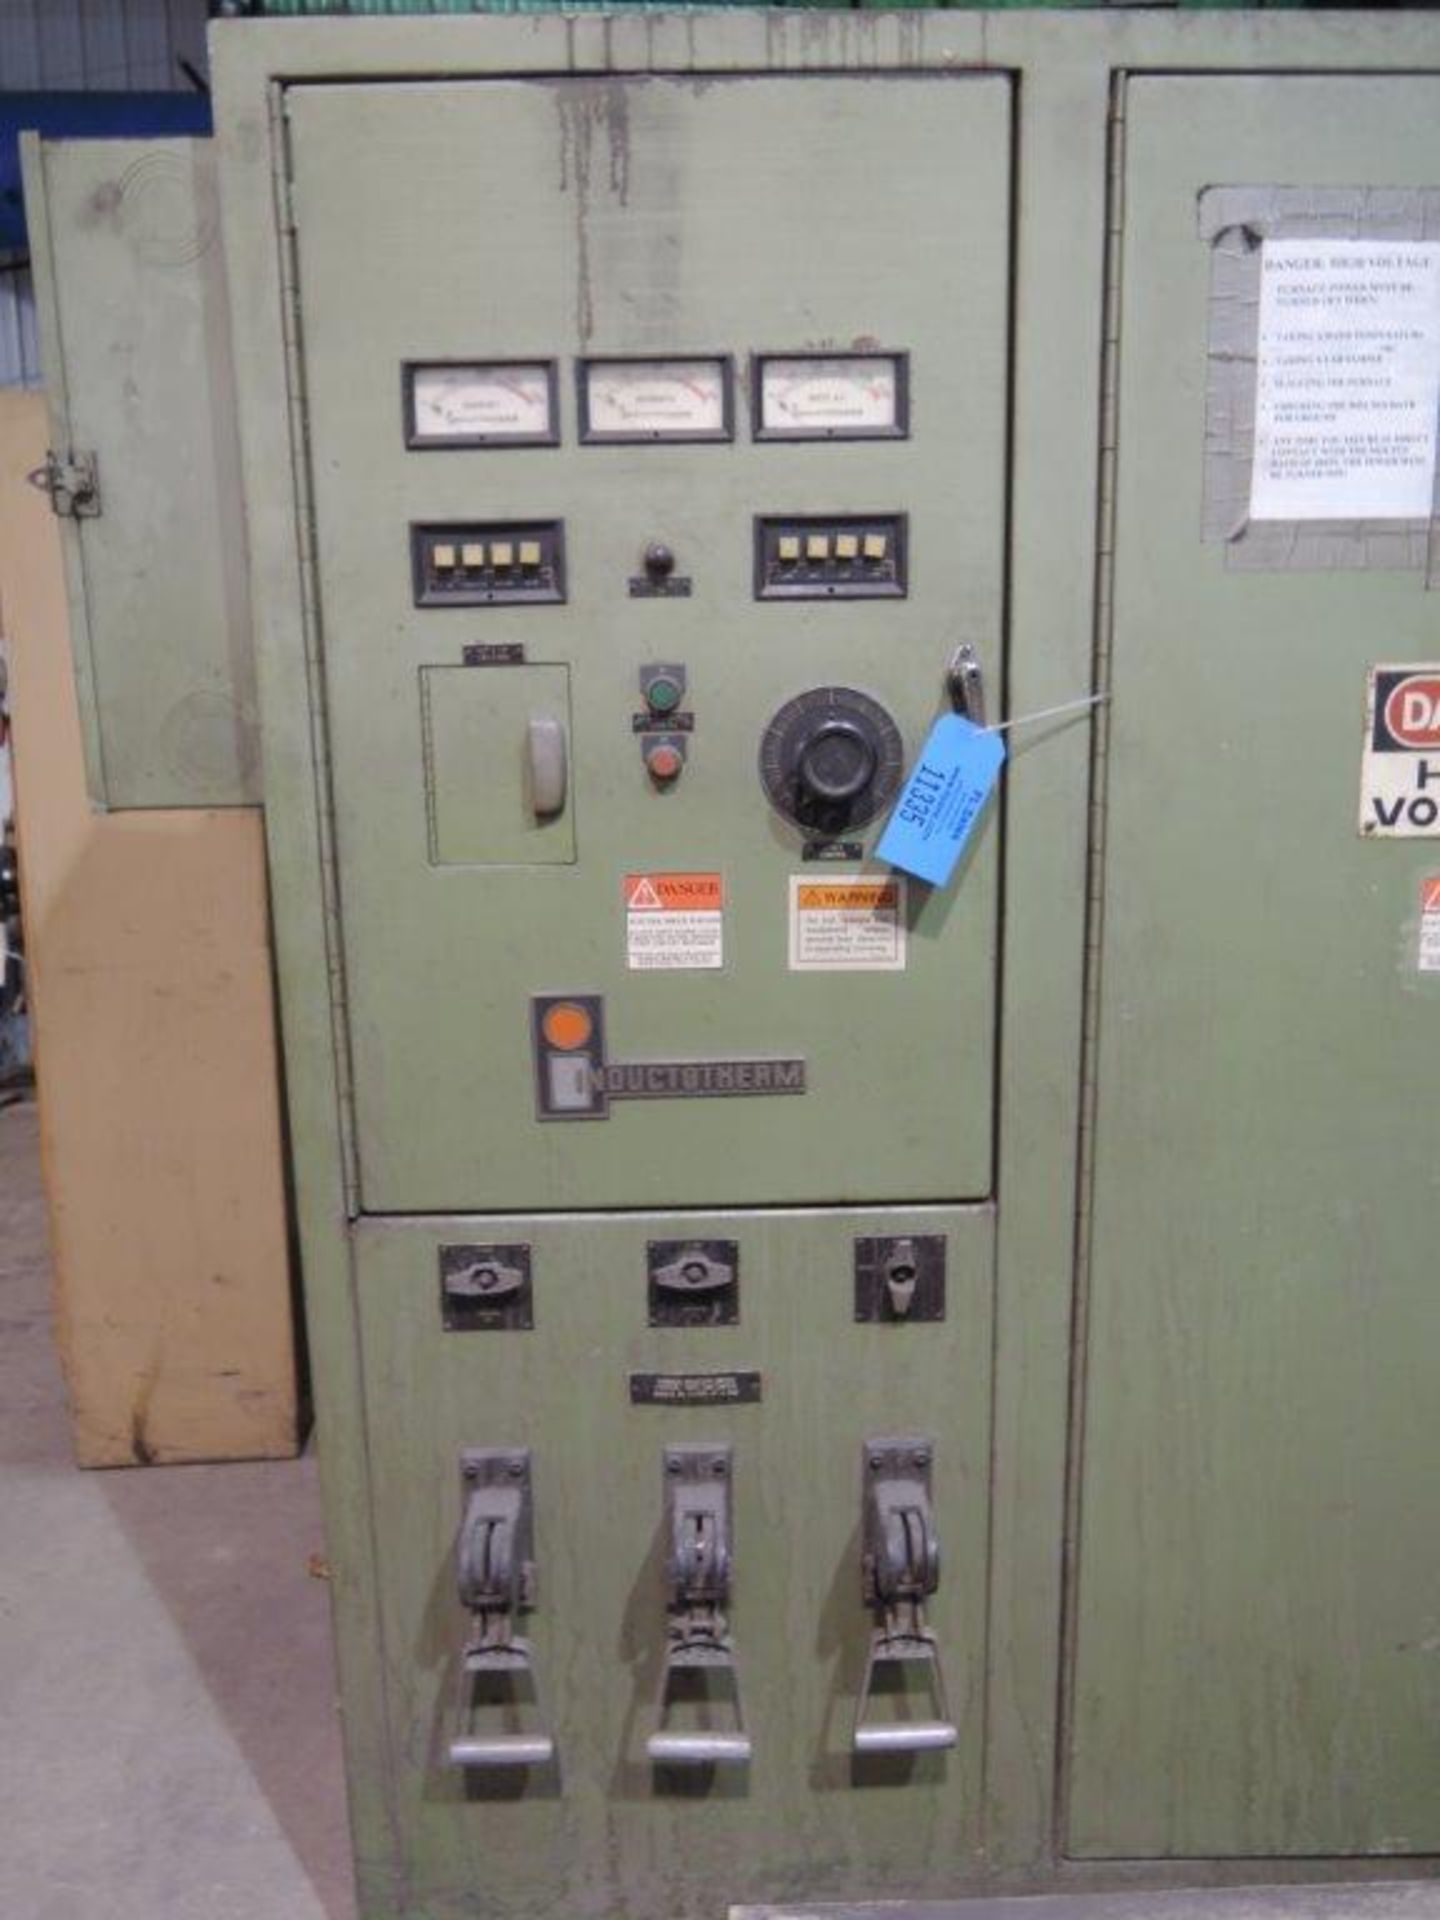 1980 INDUCTOTHERM MODEL VIP MK IV CORELESS INDUCTION POWER SUPPLY S/N 80-75180-244-11 - Image 2 of 5